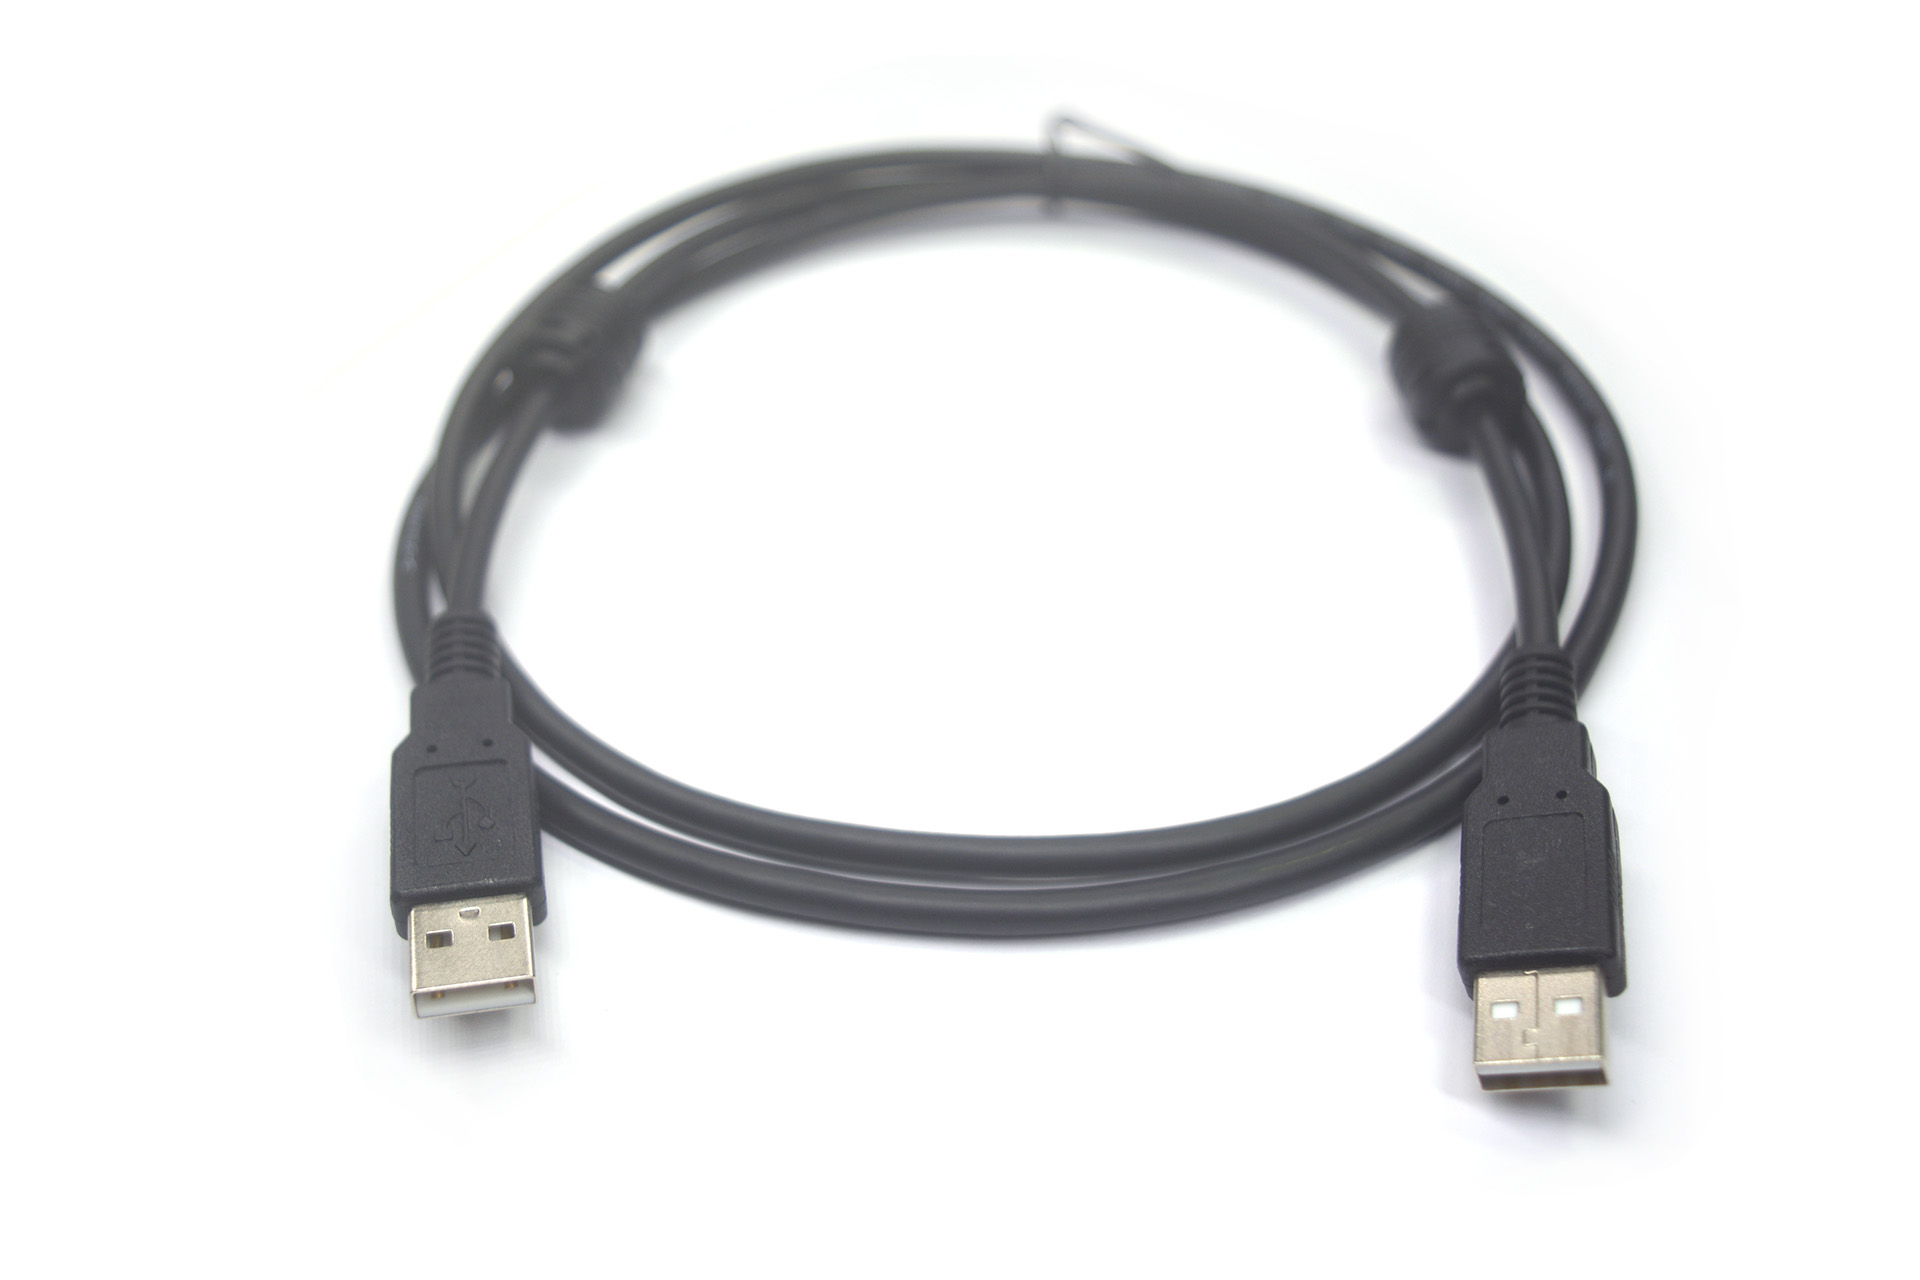 USB2.0 type A-A male cable